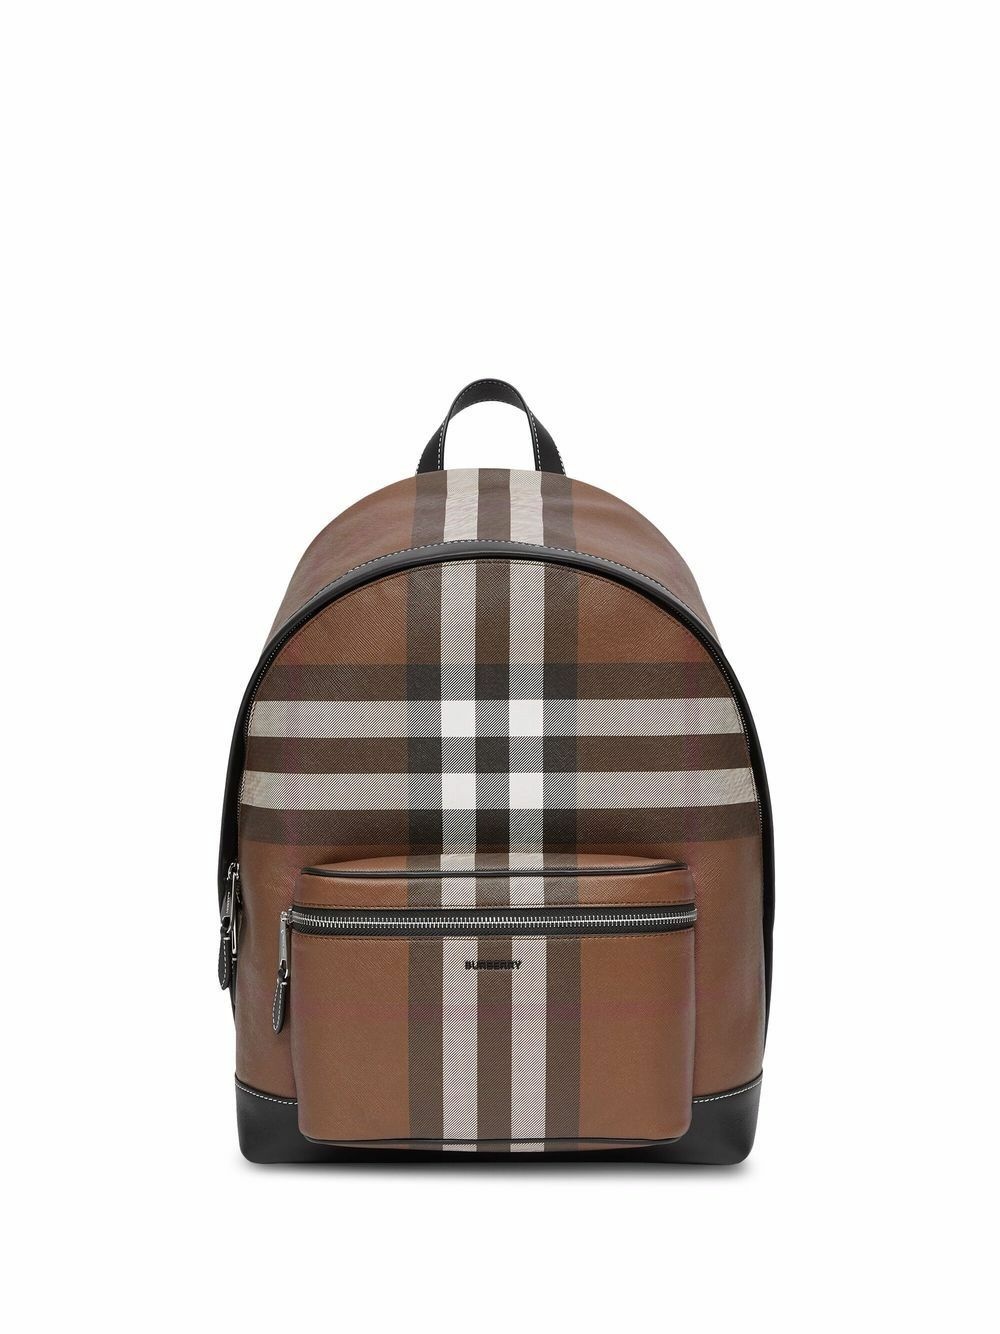 BURBERRY - Check Motif Backpack Burberry